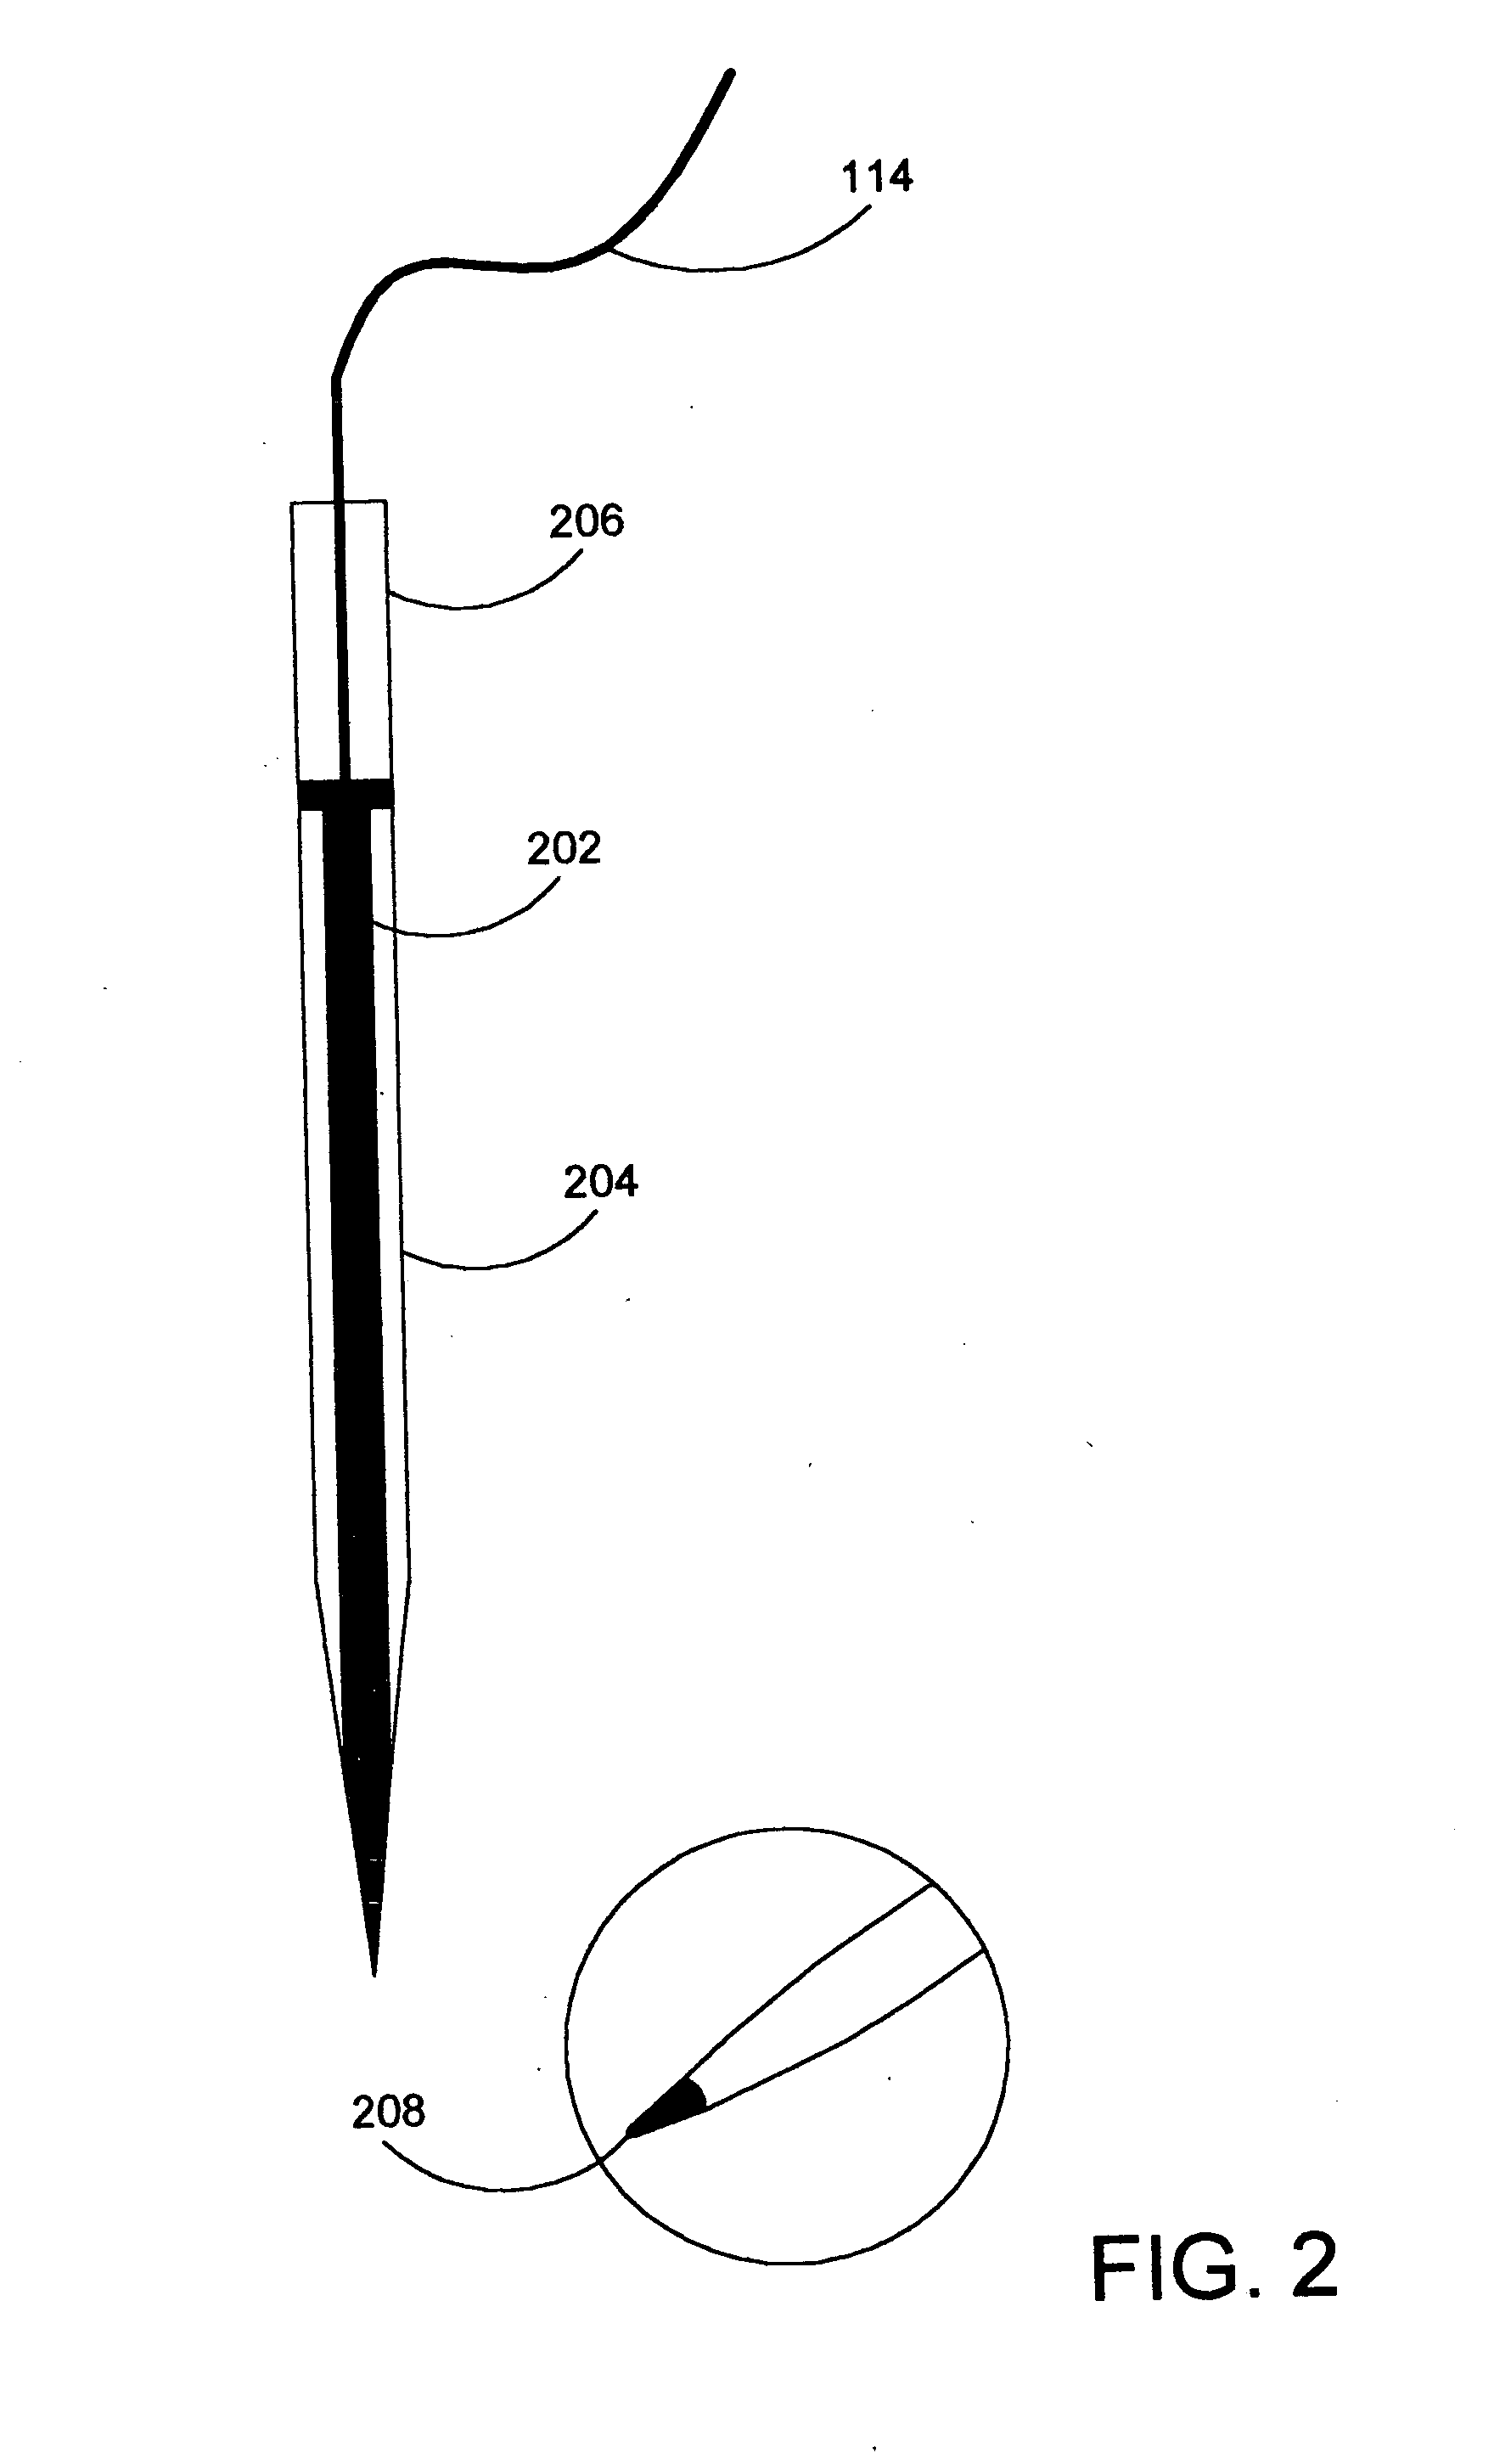 Apparatus for stimulating muscular contraction and relaxation